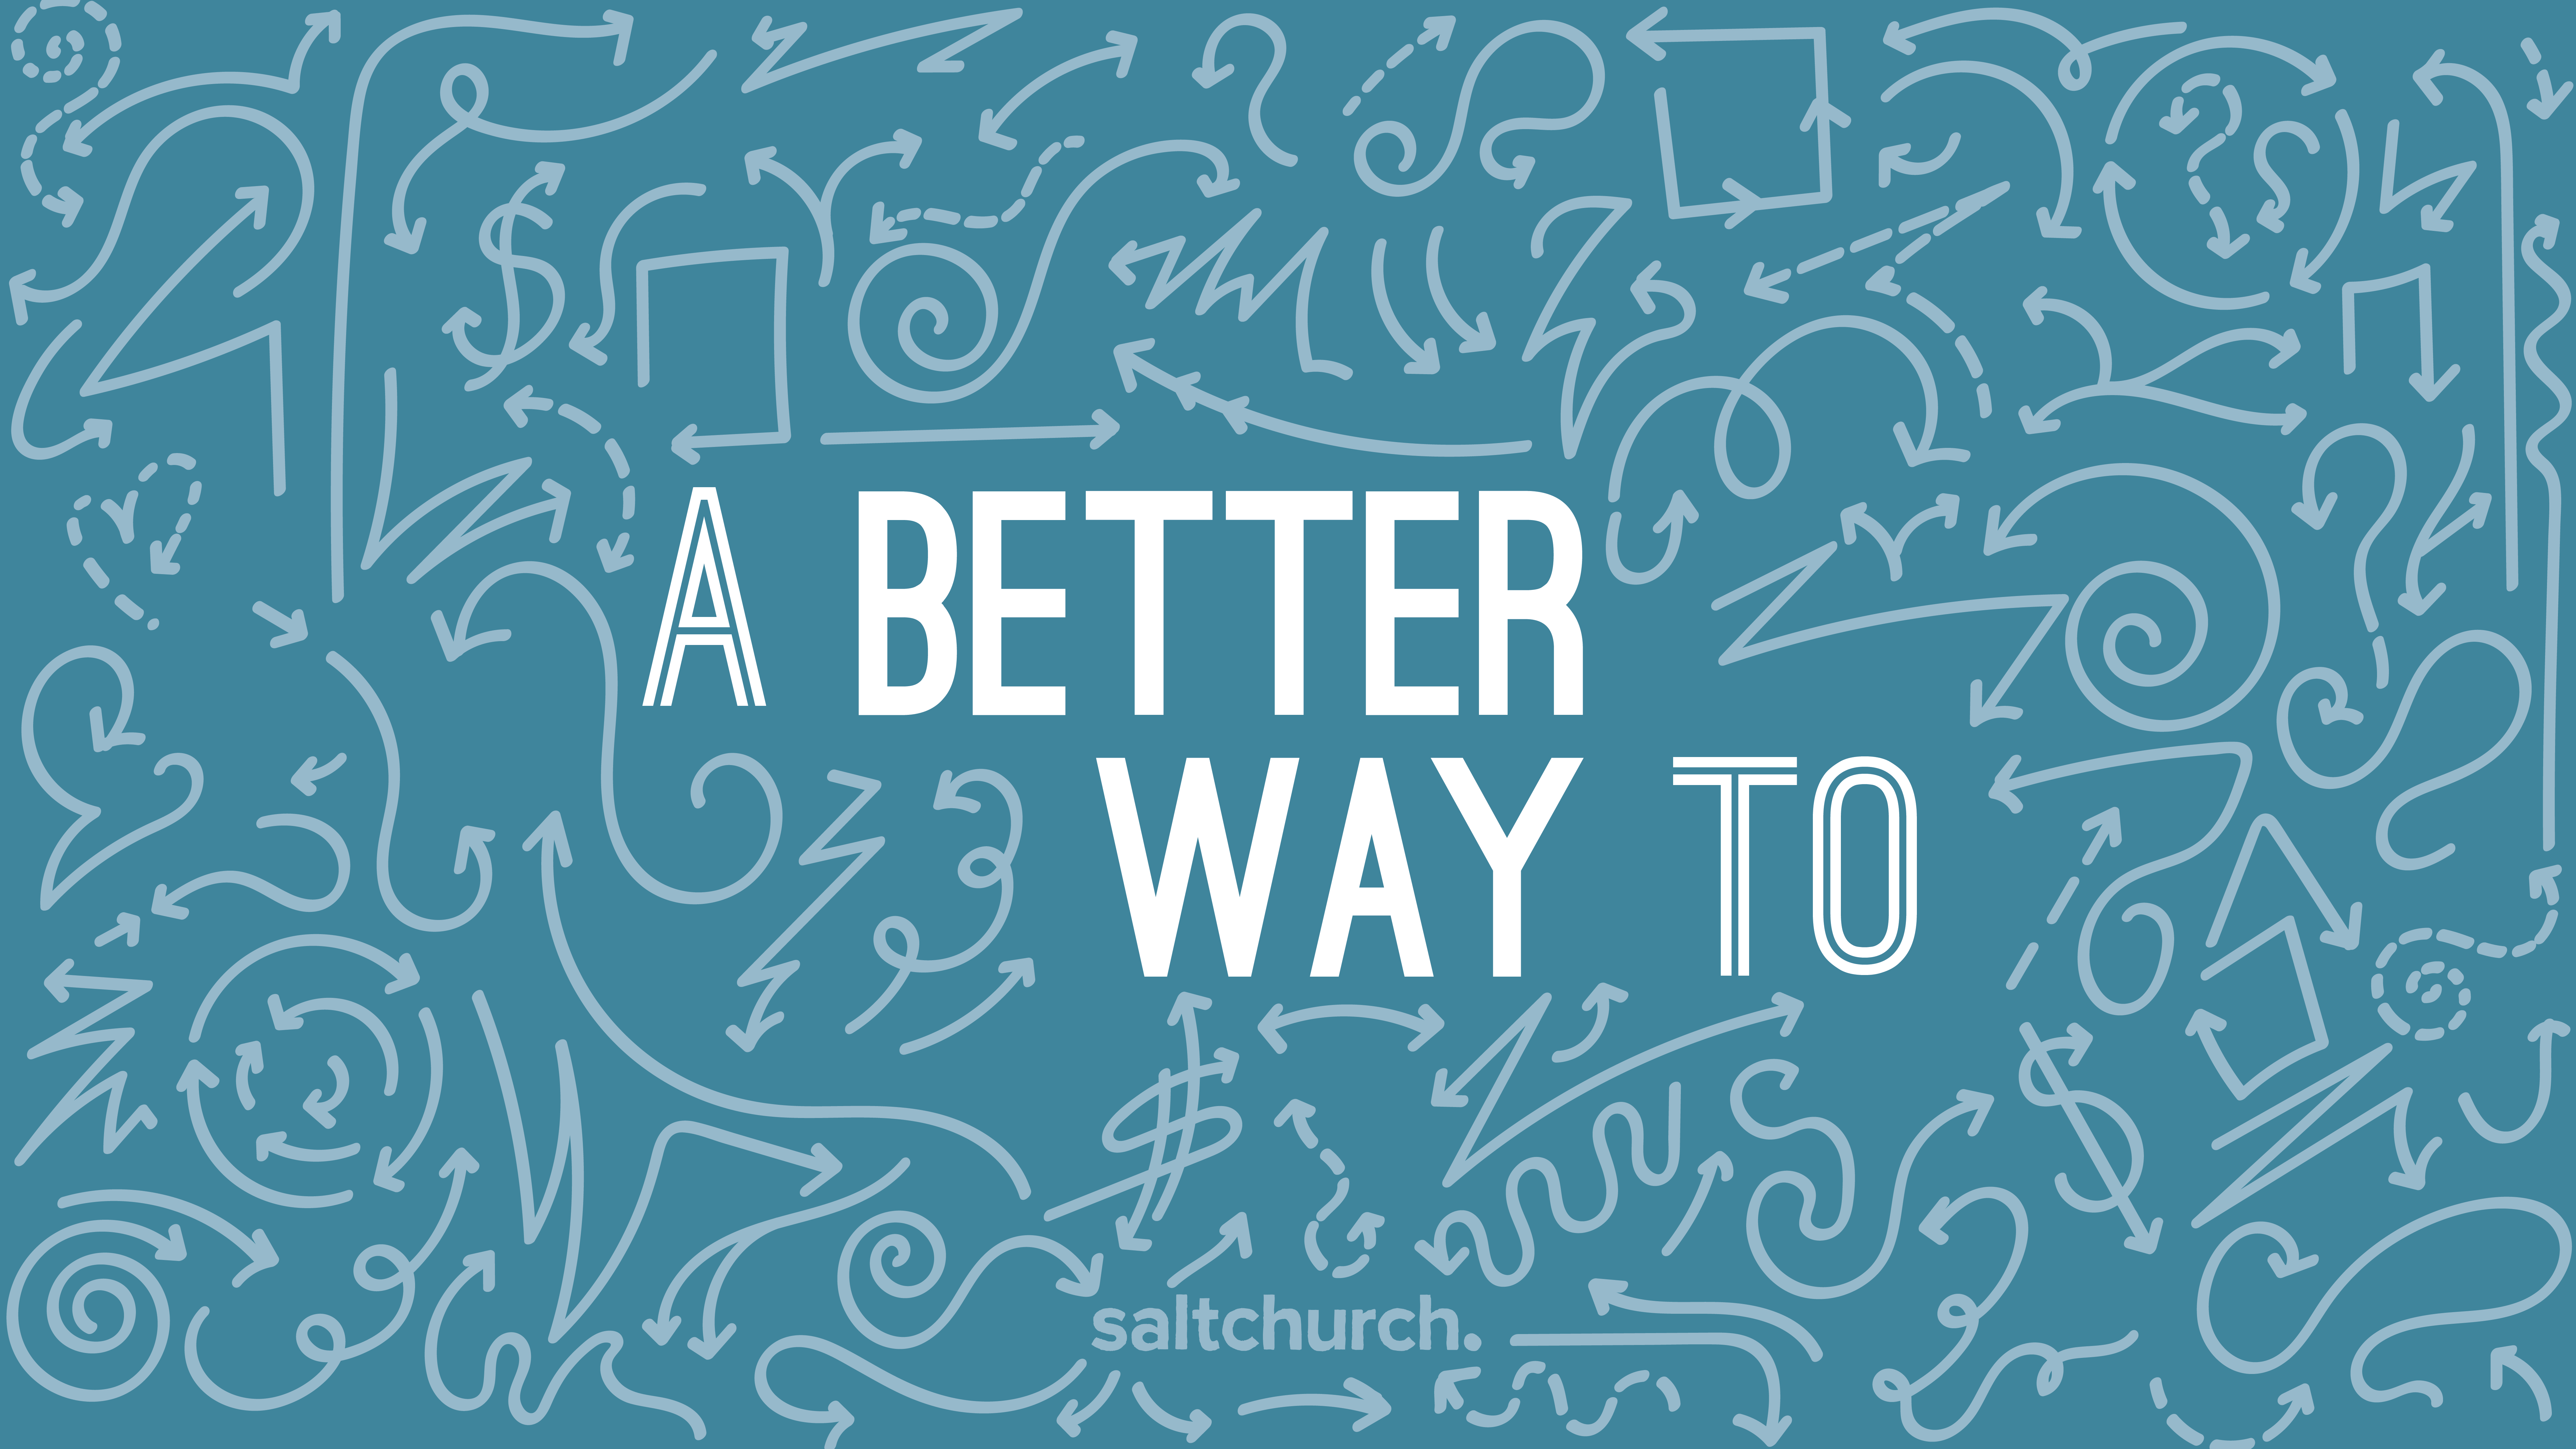 A better way to be eco-friendly (Hebrews 2)